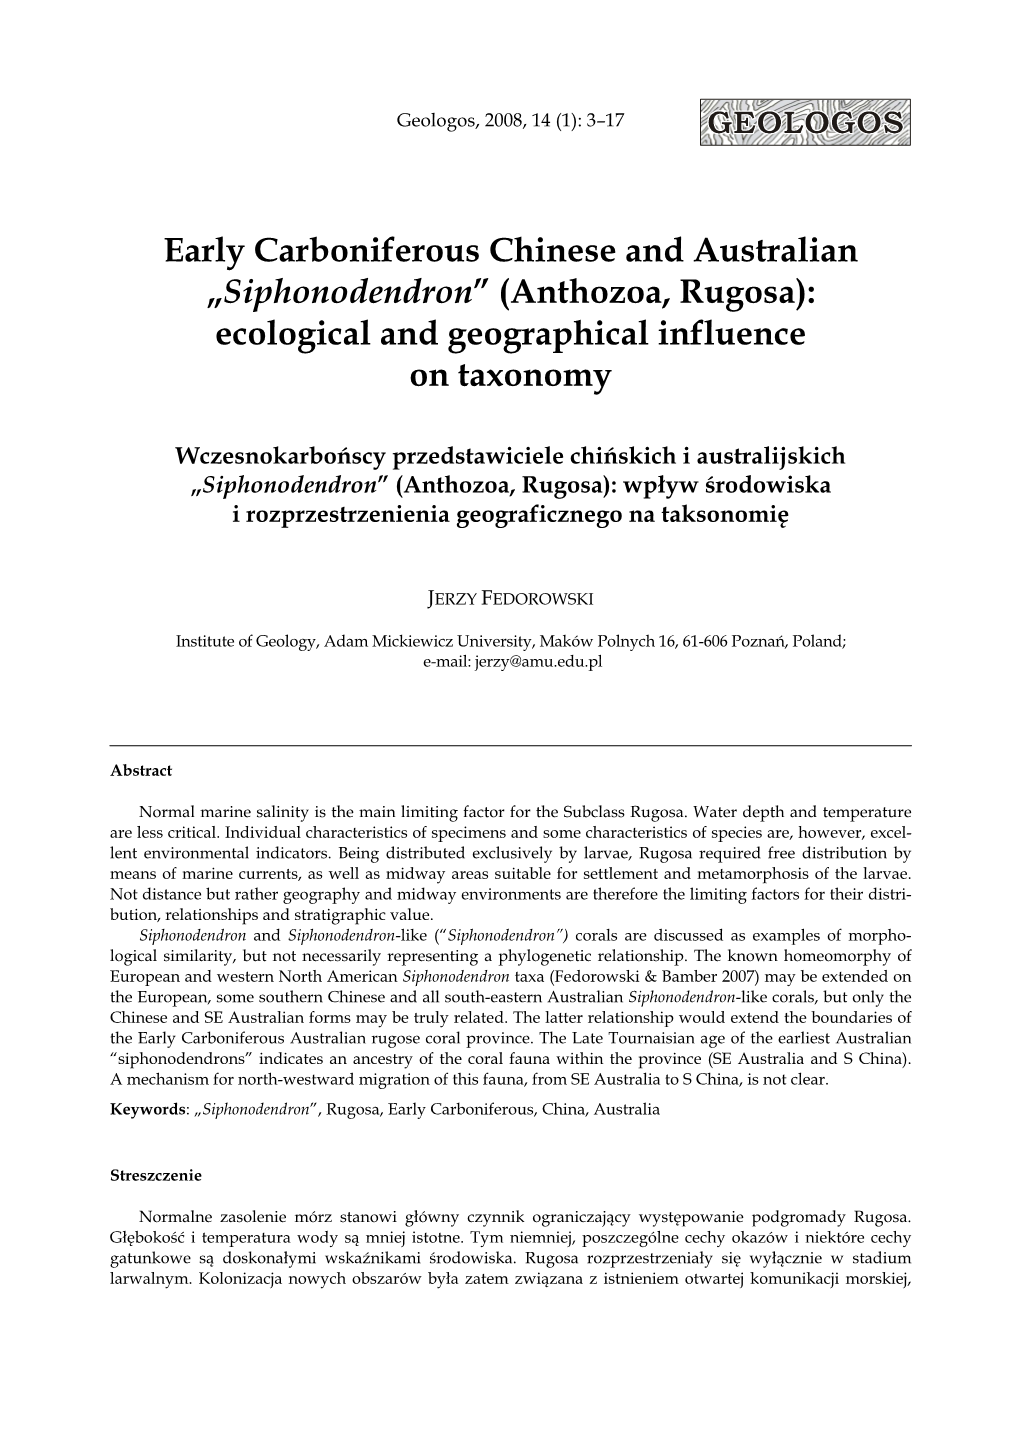 Early Carboniferous Chinese and Australian „Siphonodendron” (Anthozoa, Rugosa): Ecological and Geographical Influence On